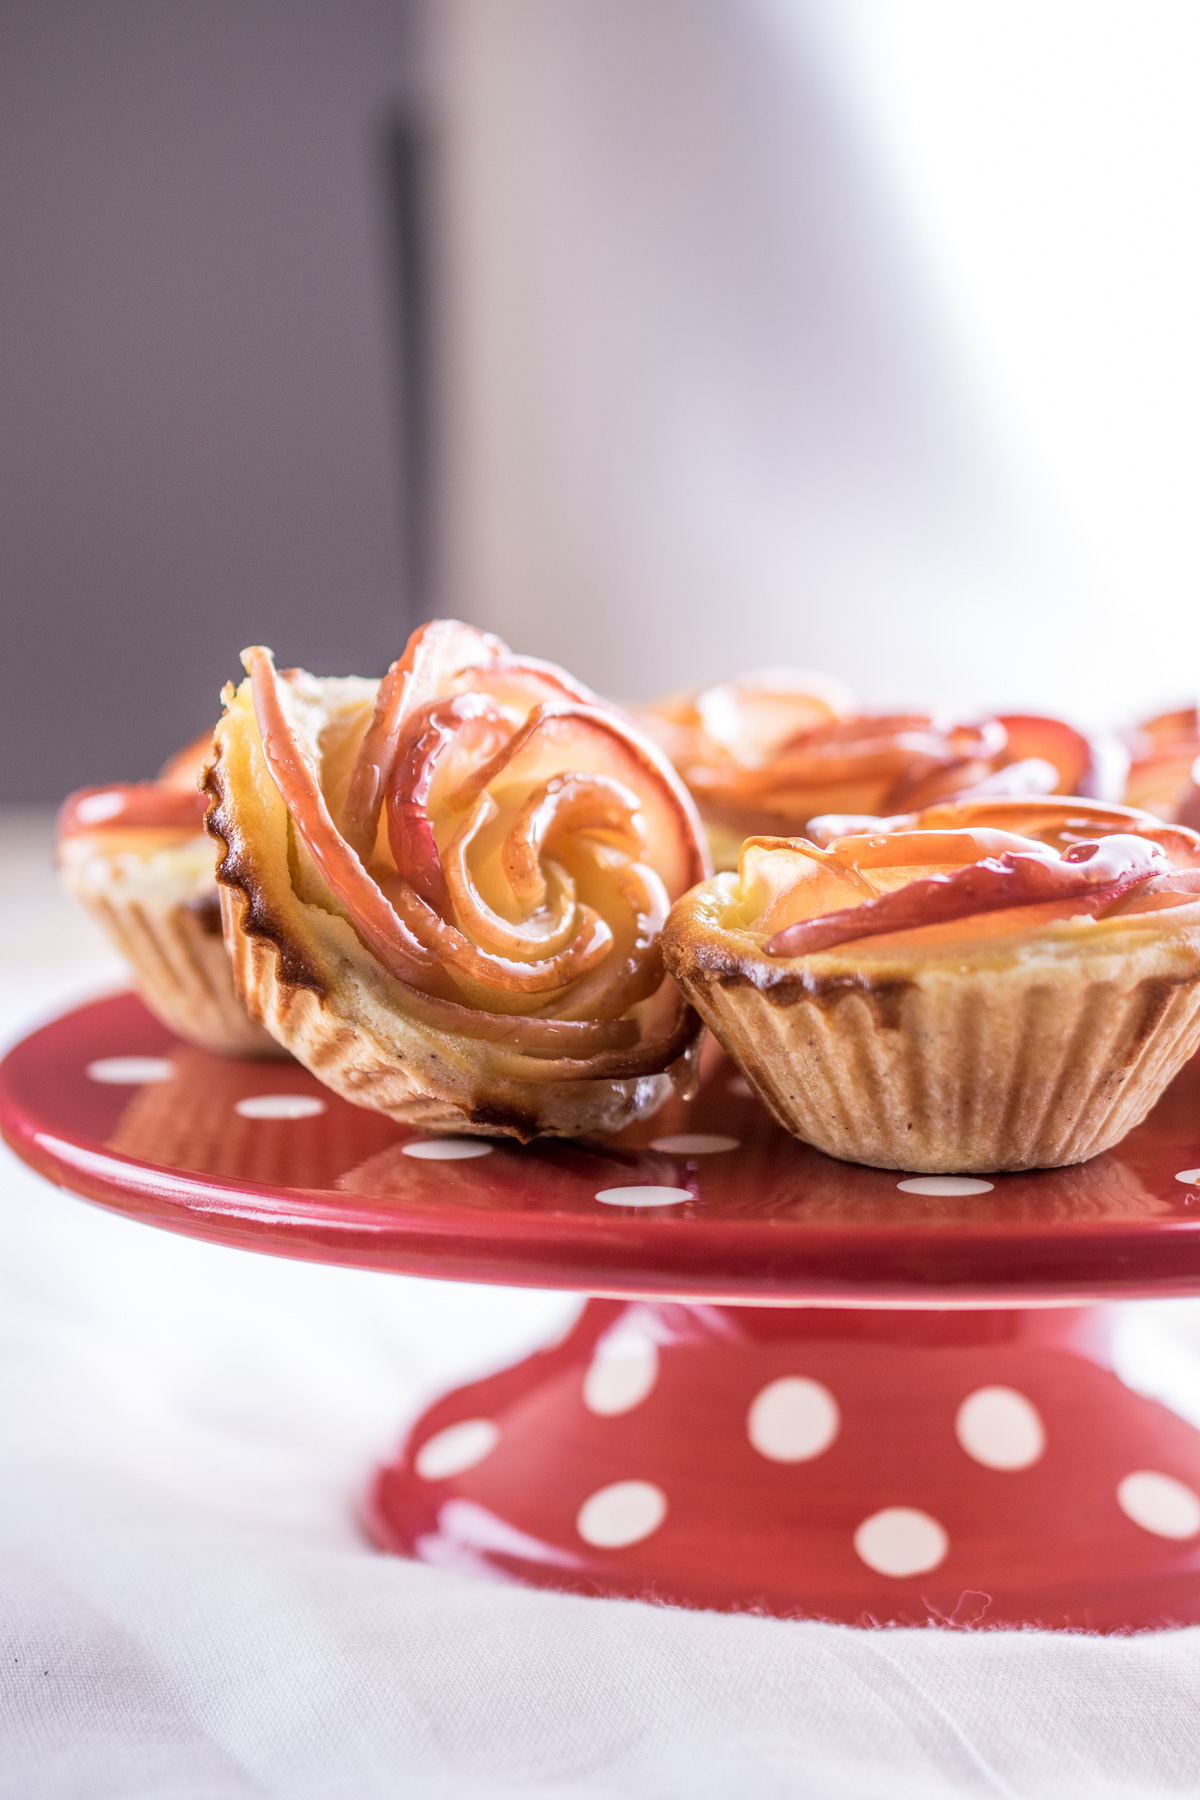 Cinnamon pastry filled with vanilla cheesecake and poached apple roses - easy to make, stunning to look at!